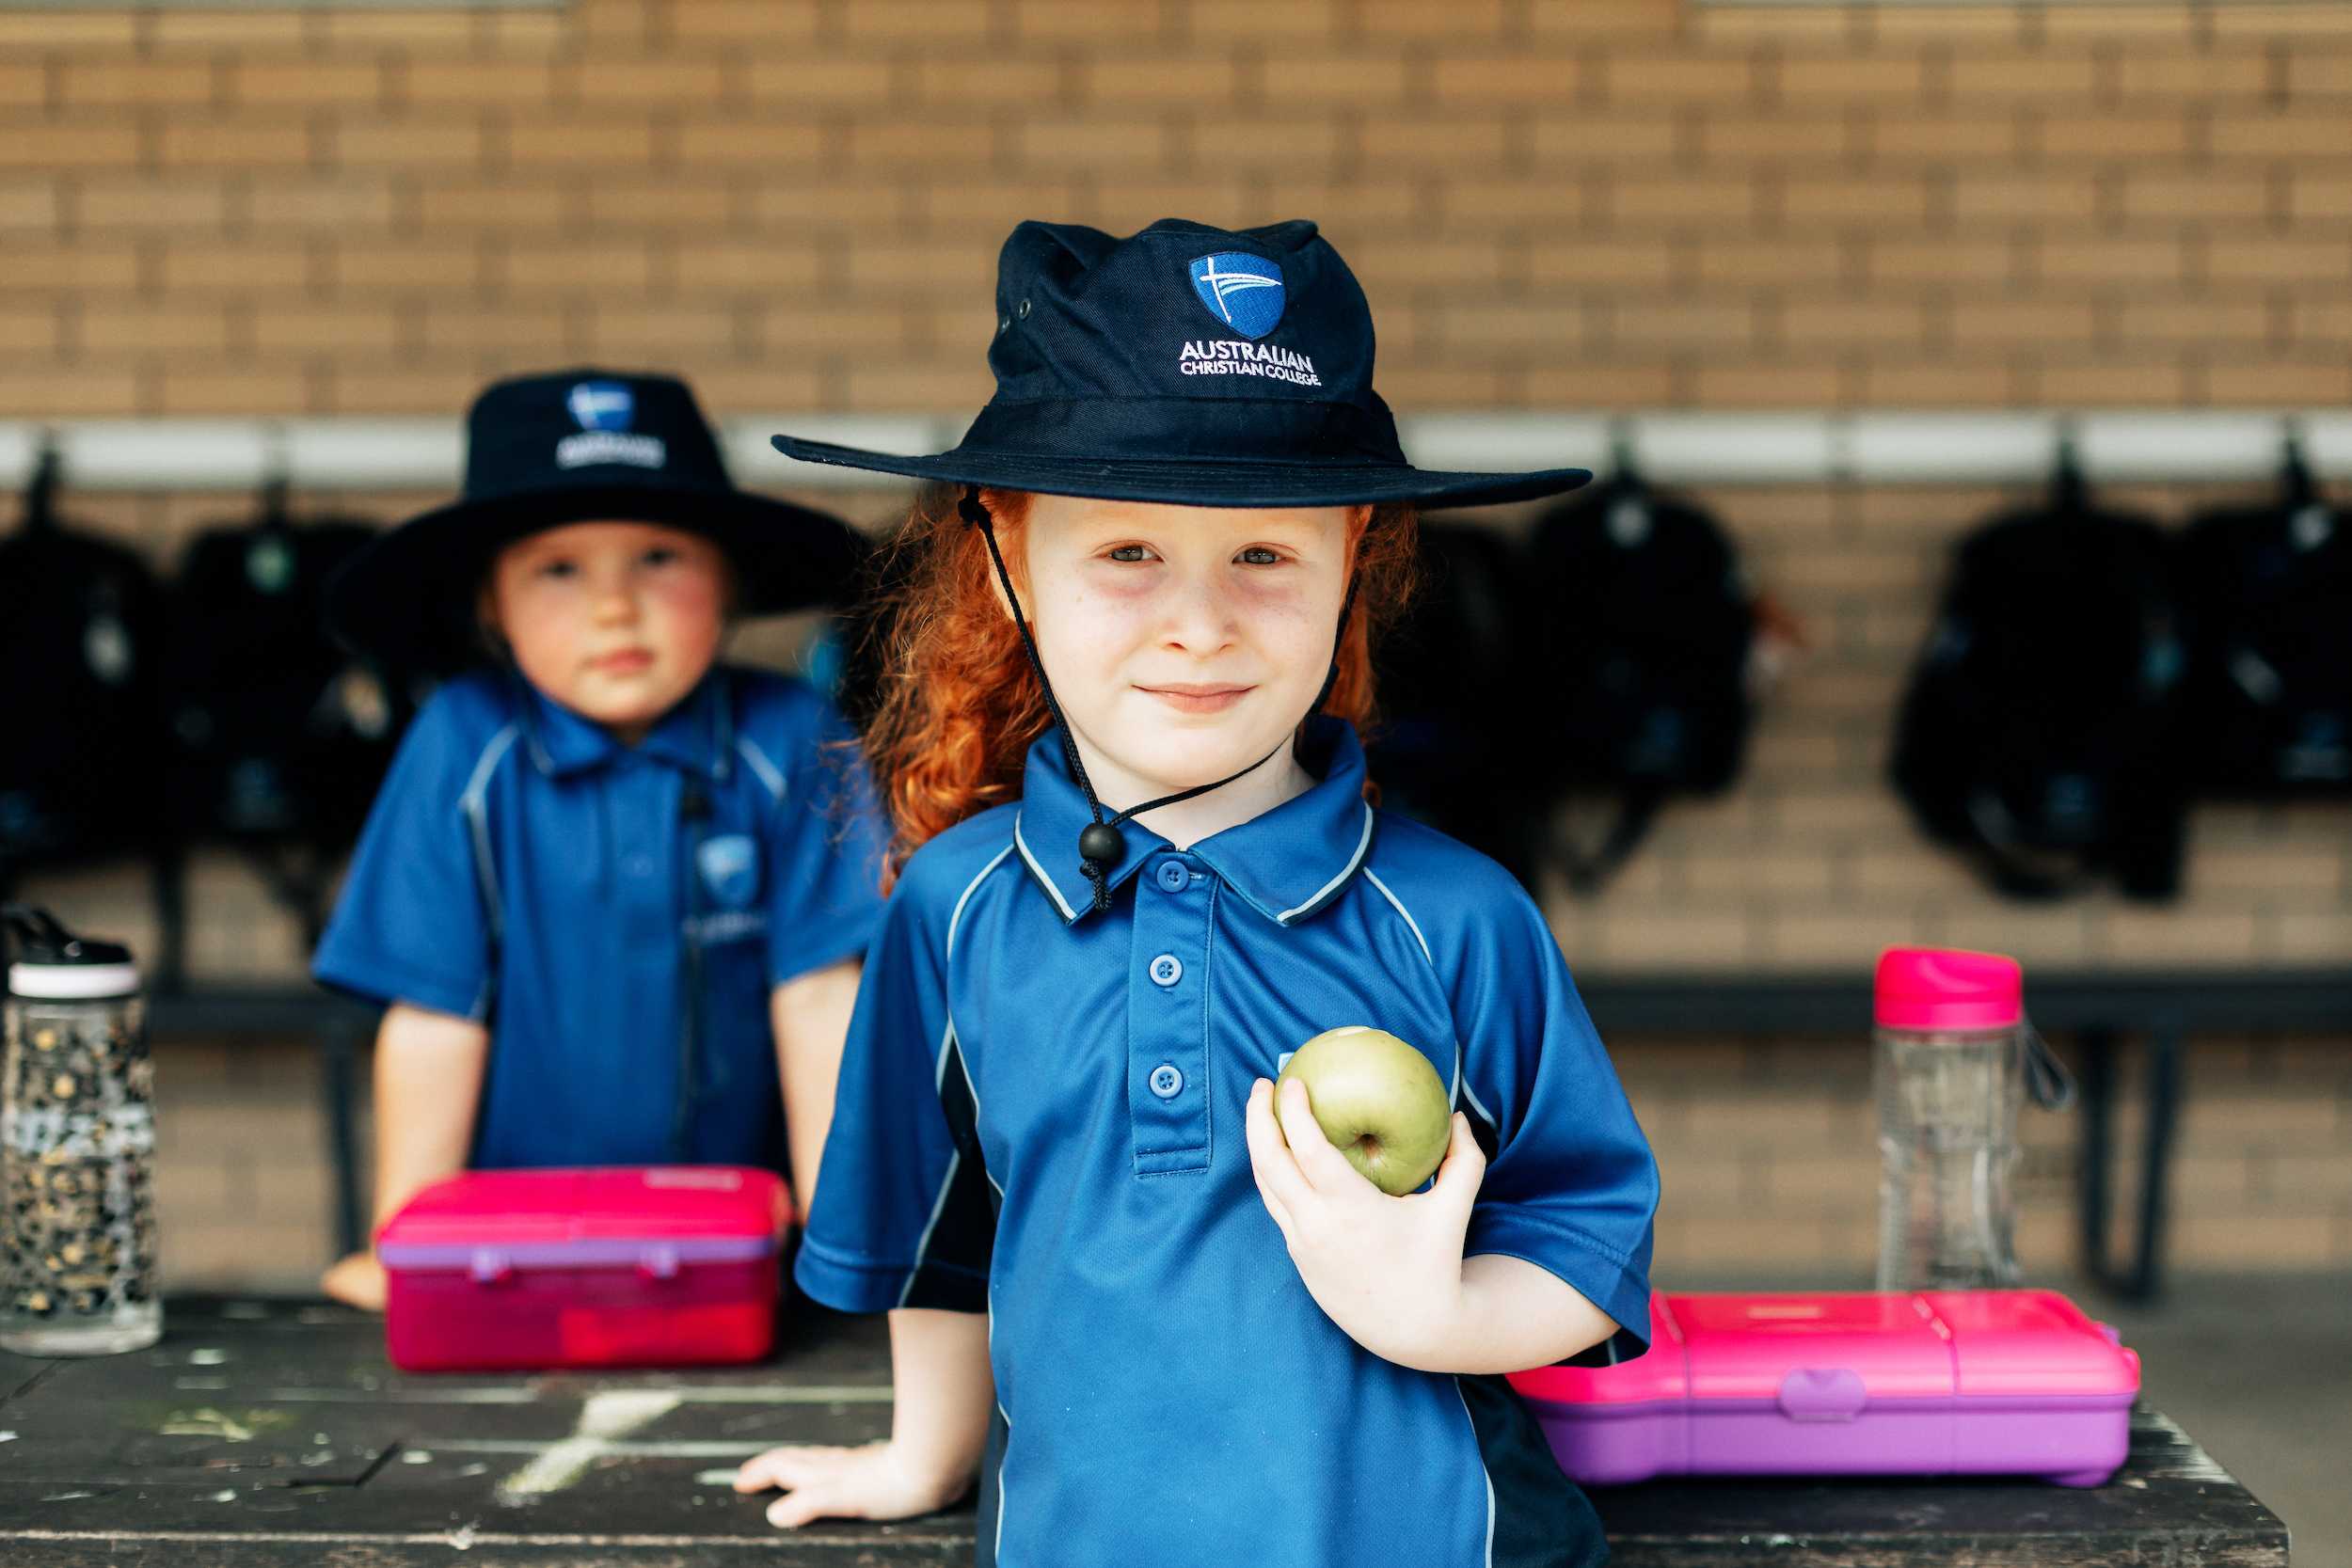 Prep school girl wearing a broad-brim hat and holding an apple at recess